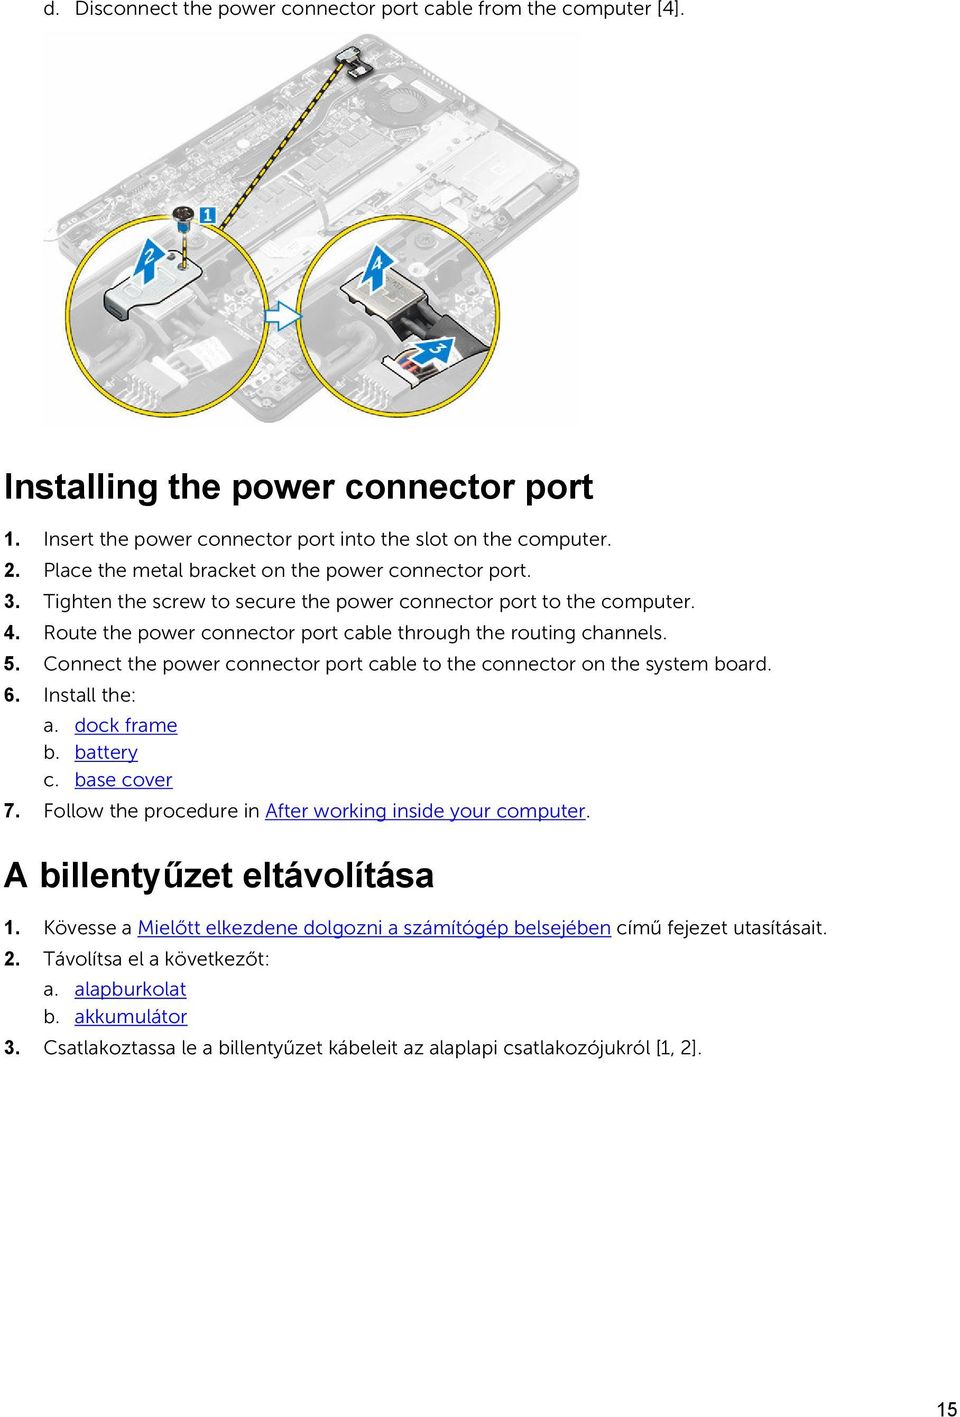 Connect the power connector port cable to the connector on the system board. 6. Install the: a. dock frame b. battery c. base cover 7. Follow the procedure in After working inside your computer.